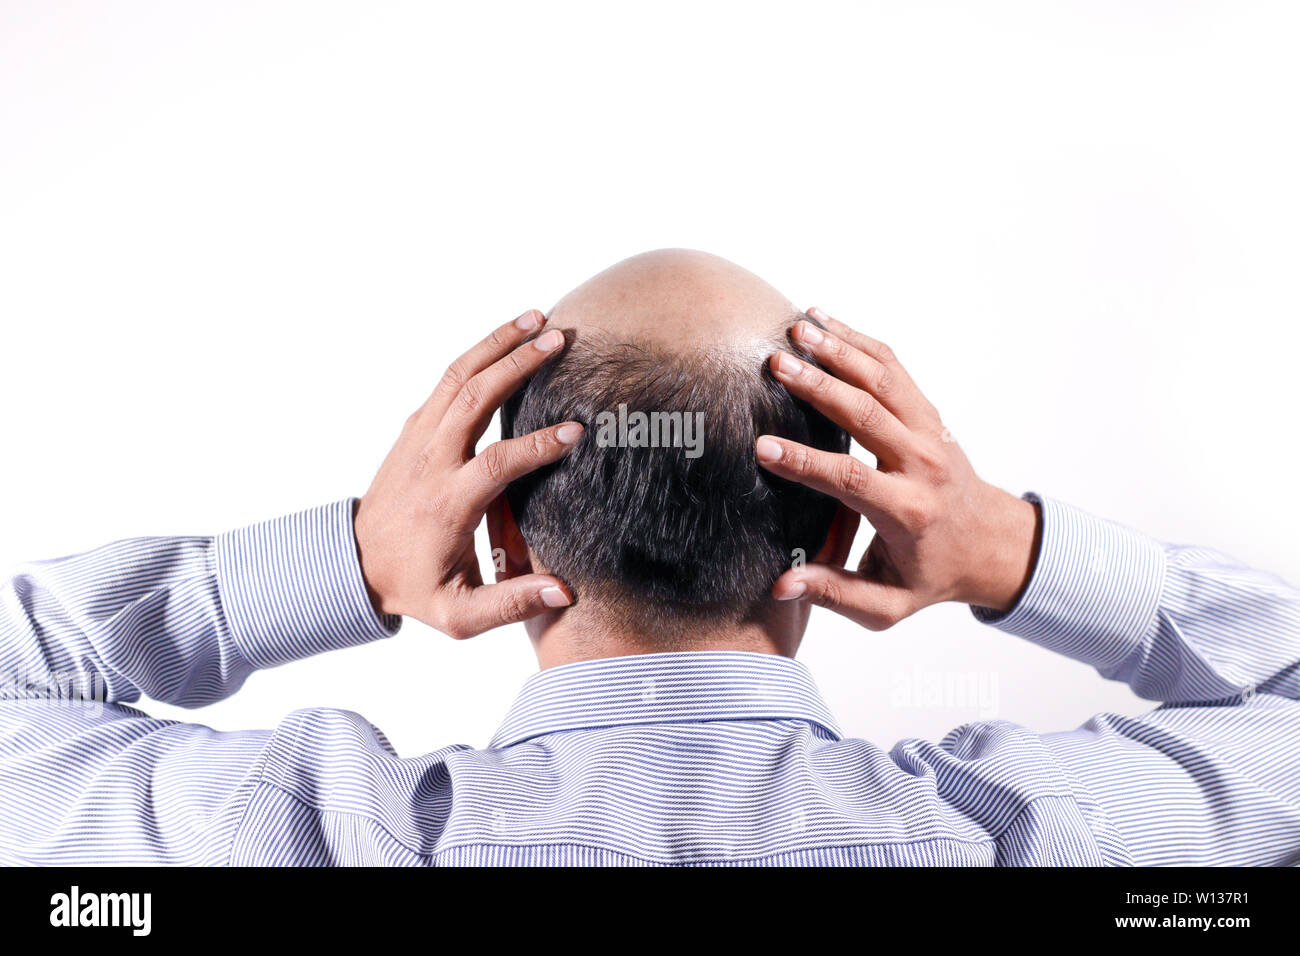 bald businessman with his head on scalp view from behind with white background Stock Photo